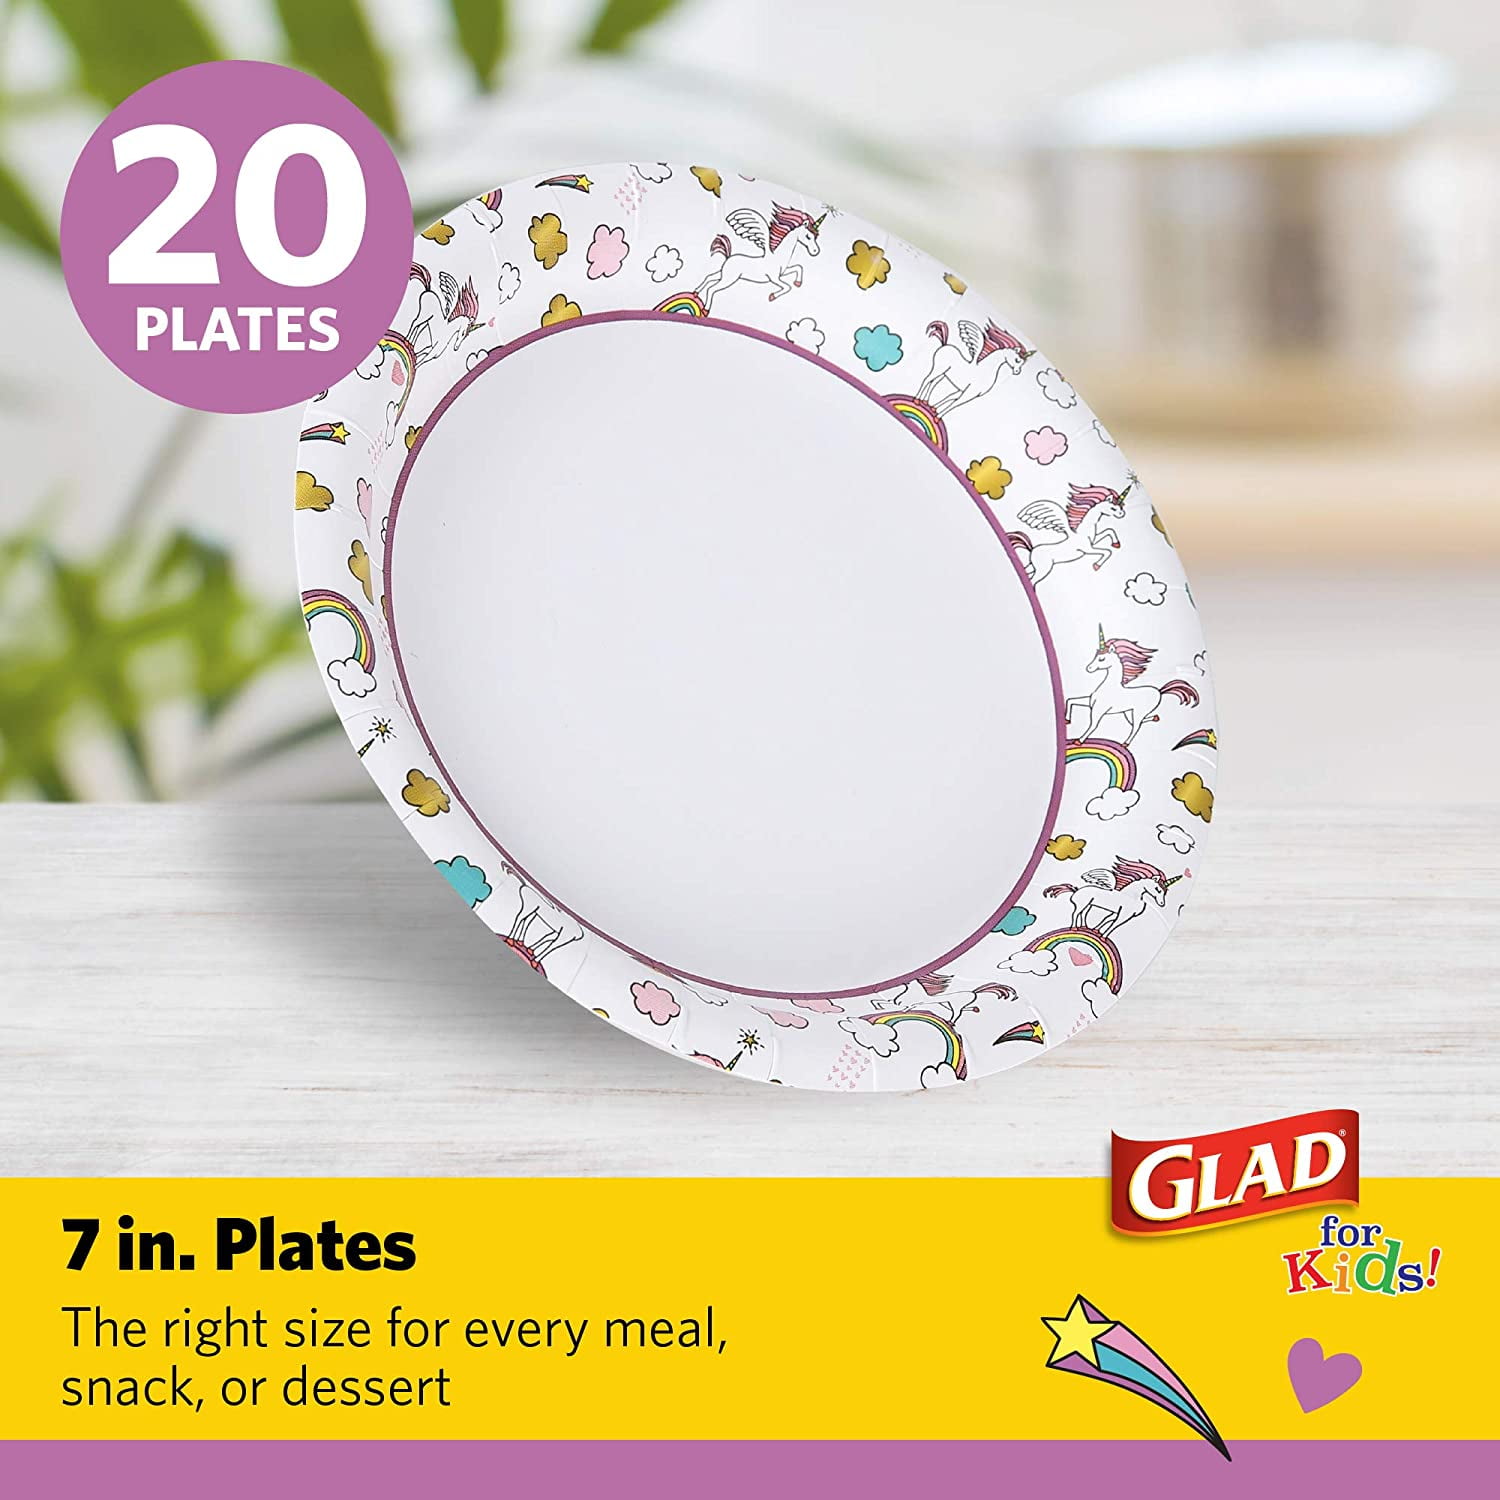 Glad for Kids Holiday Paper Plates, 20 Count | Small Round Paper Plates  With Cute Snowman Design for Kids | Heavy Duty Disposable Soak Proof